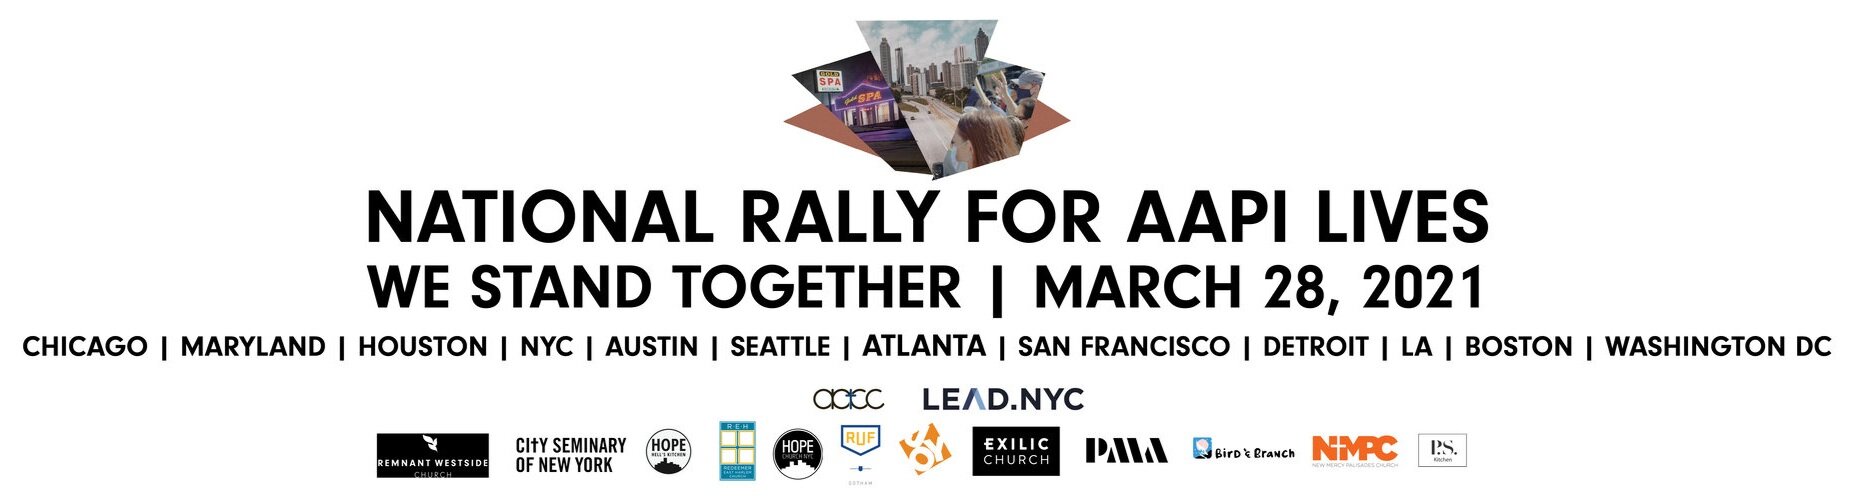 National Rally for AAPI Lives and Dignity @ March 28, 2021 in 14 Cities